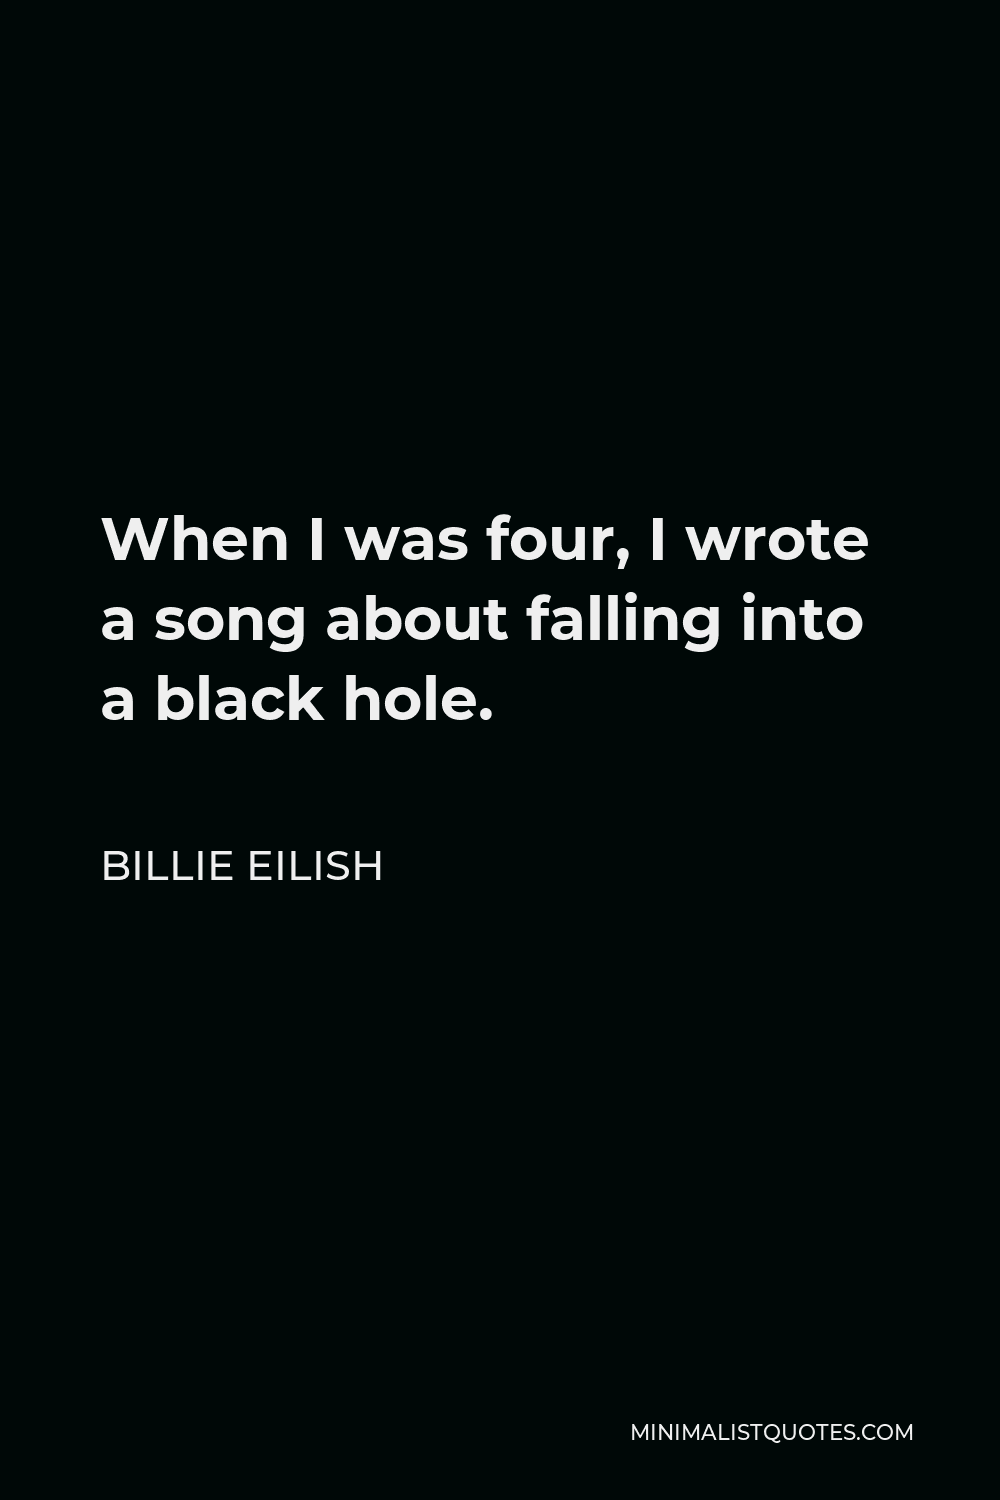 Billie Eilish Quote - When I was four, I wrote a song about falling into a black hole.